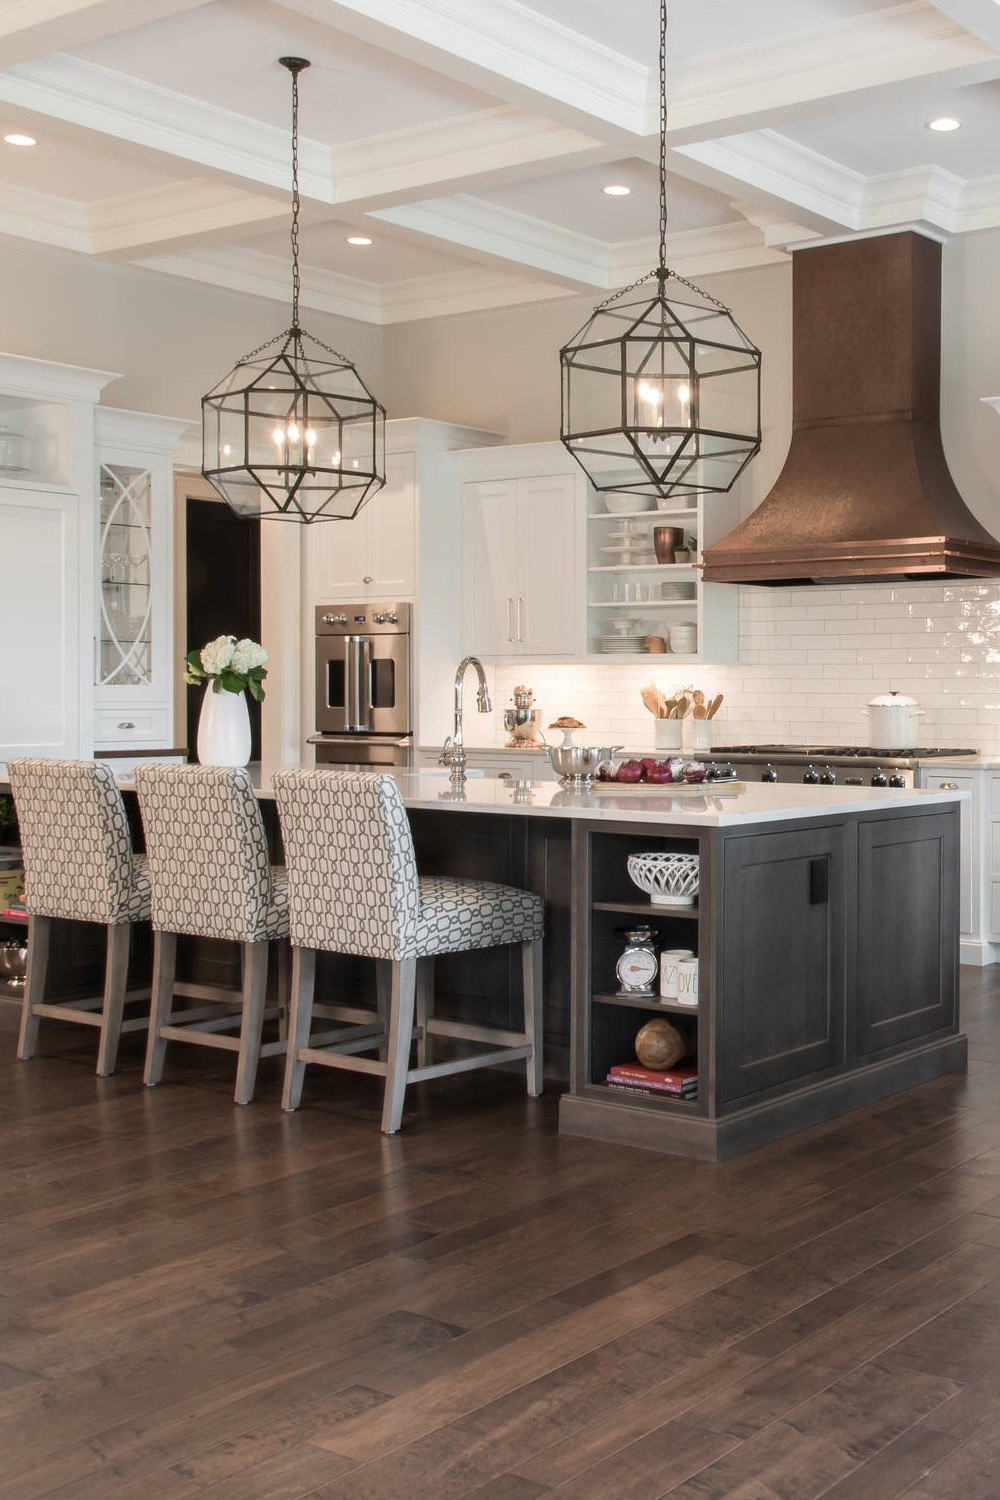 Eat In Kitchen Island Space Seating Chairs Familty Furniture Frends Wood Floor